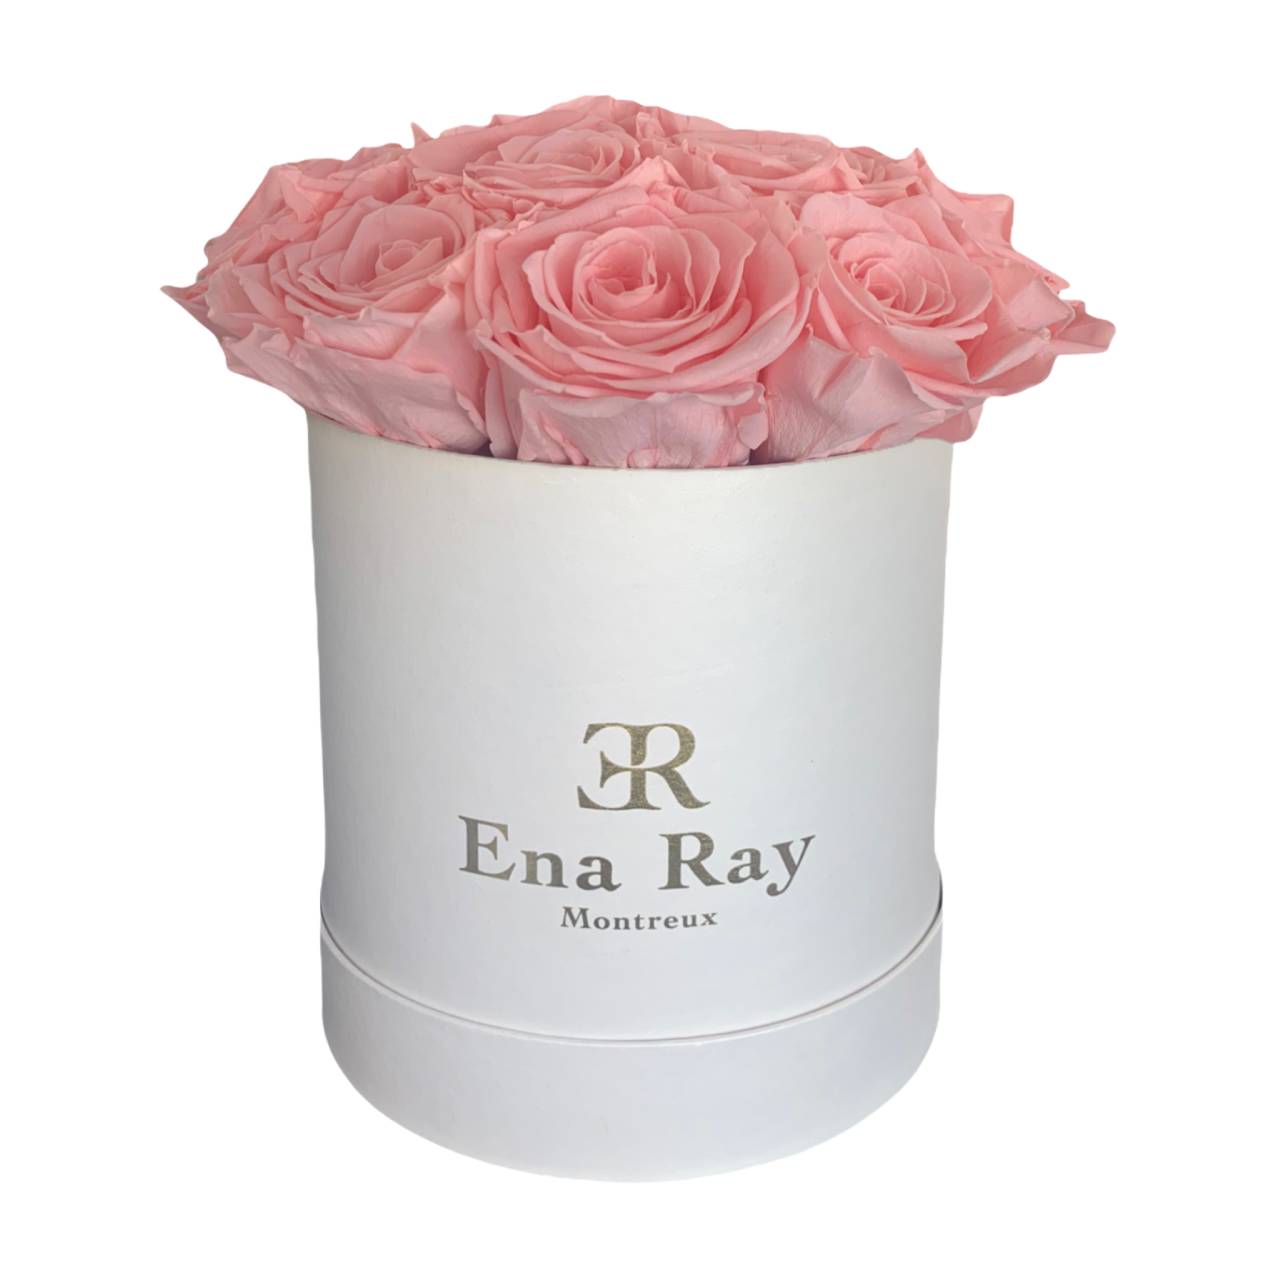 Infinity roses in a white box size L ➔ Ena Ray online boutique ᐅ Delivery  across Switzerland